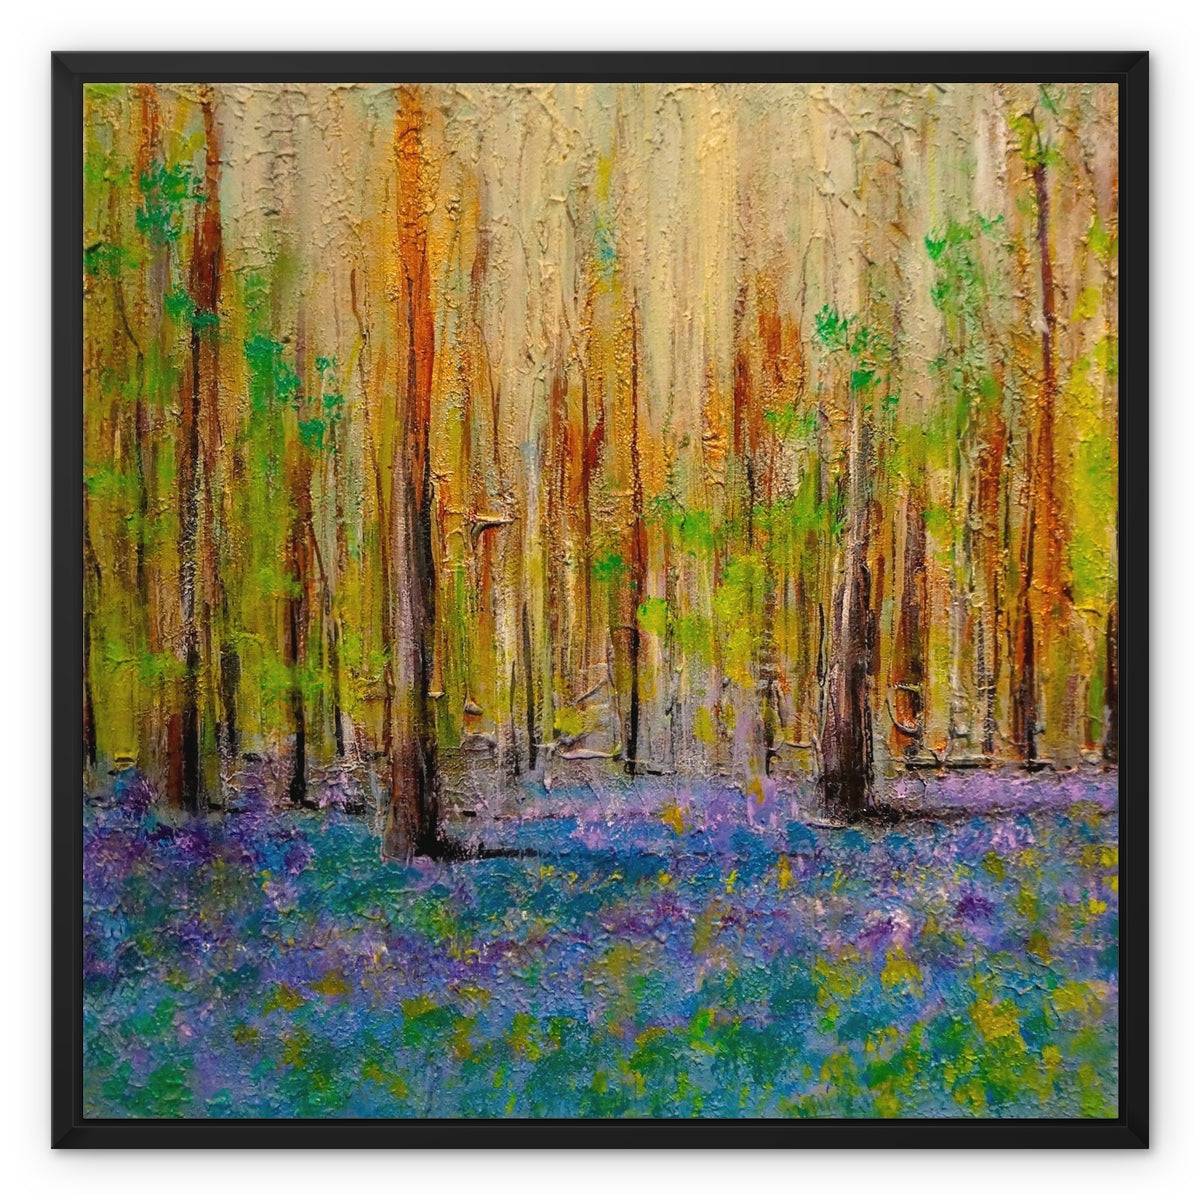 Highland Bluebells Painting | Framed Canvas-Floating Framed Canvas Prints-Scottish Highlands & Lowlands Art Gallery-24"x24"-Black Frame-Paintings, Prints, Homeware, Art Gifts From Scotland By Scottish Artist Kevin Hunter